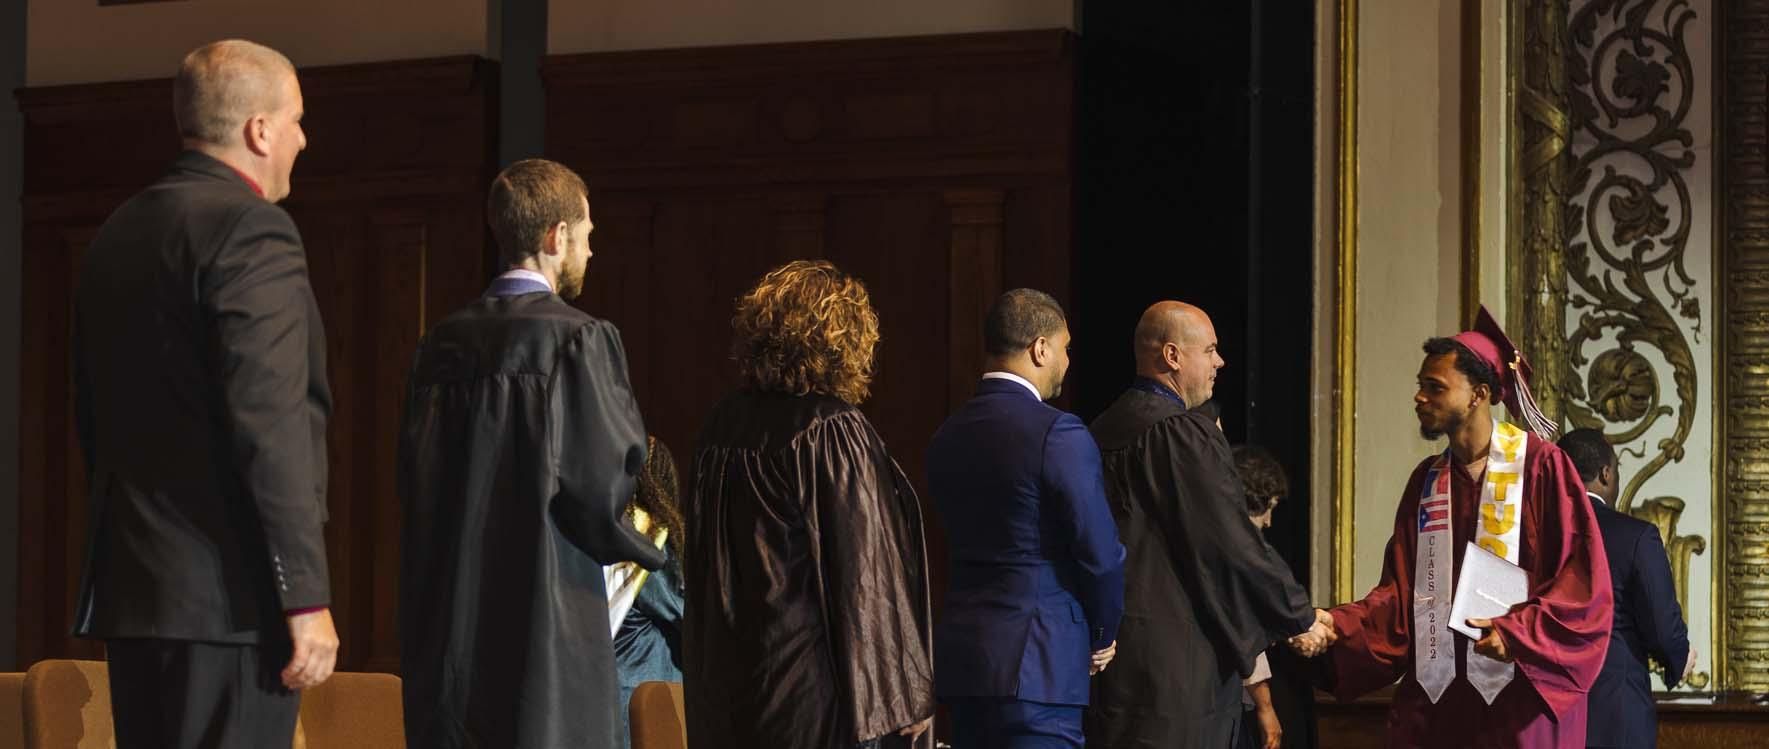 A group of people are standing around a woman in a graduation cap and gown.